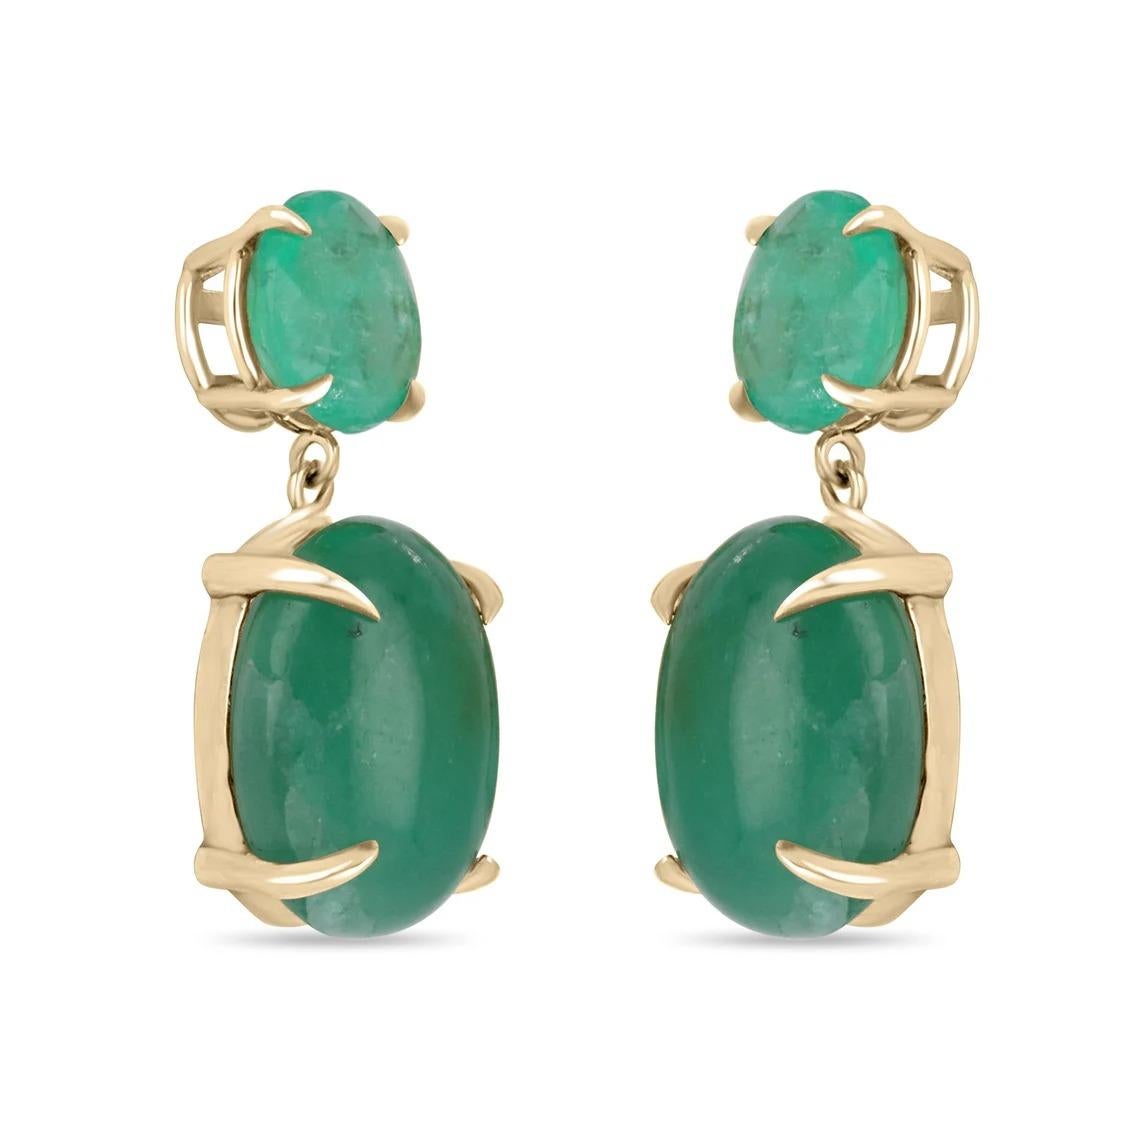 Featuring here is a marvelous set of large statement size round Colombian emerald and oval cabochon dangling studs in fine 14K yellow gold. Displayed are medium-rich green Round and Oval cut emeralds with very good transparency, accented by a simple